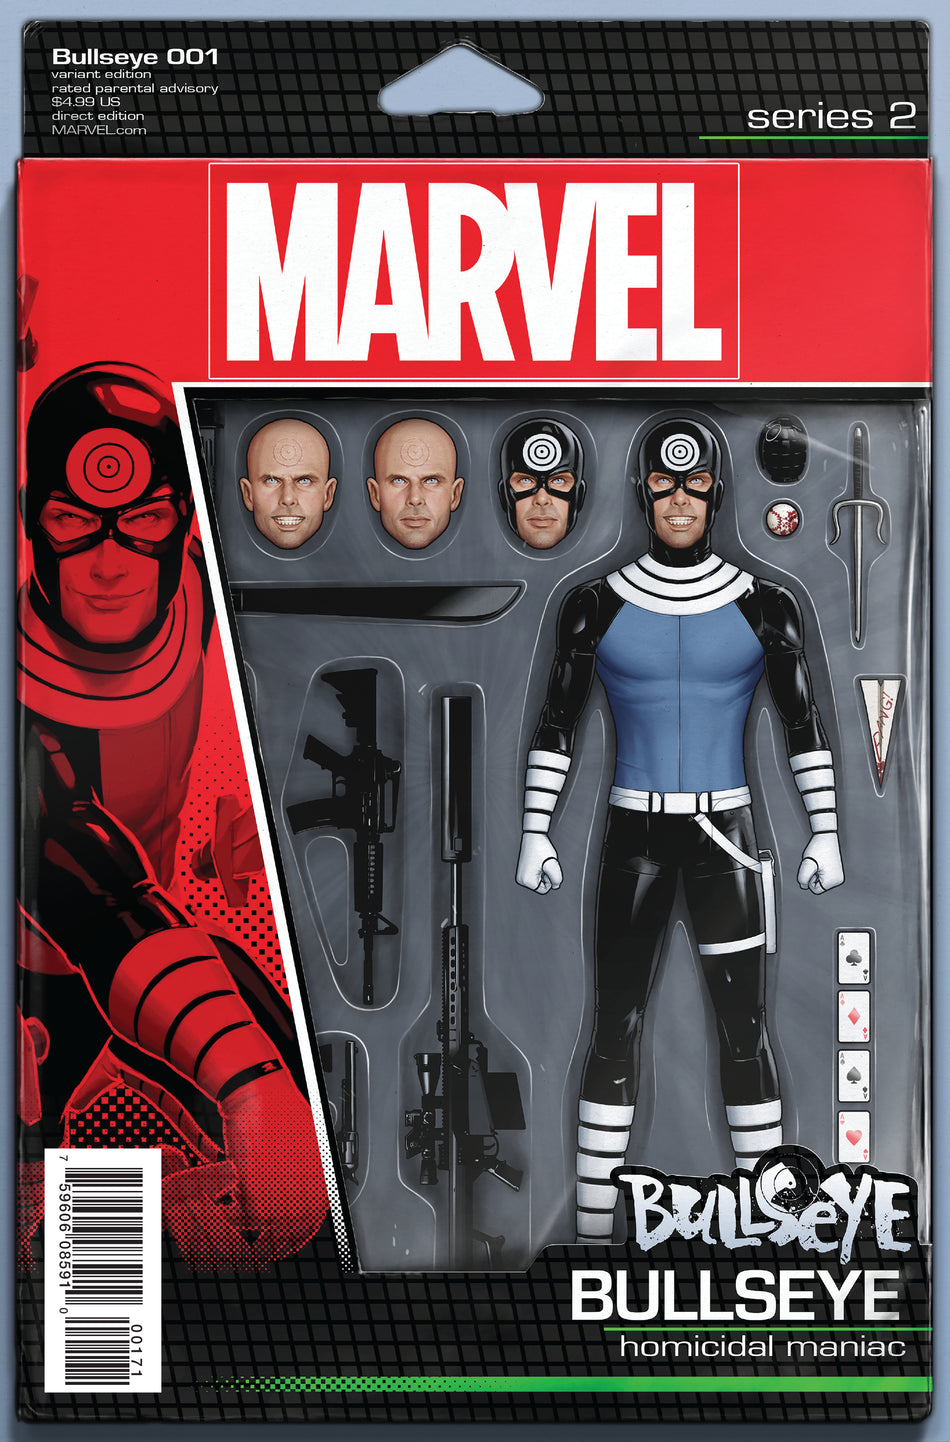 Photo of Bullseye Issue 1 (of 5) Christopher Action Figure Var comic sold by Stronghold Collectibles